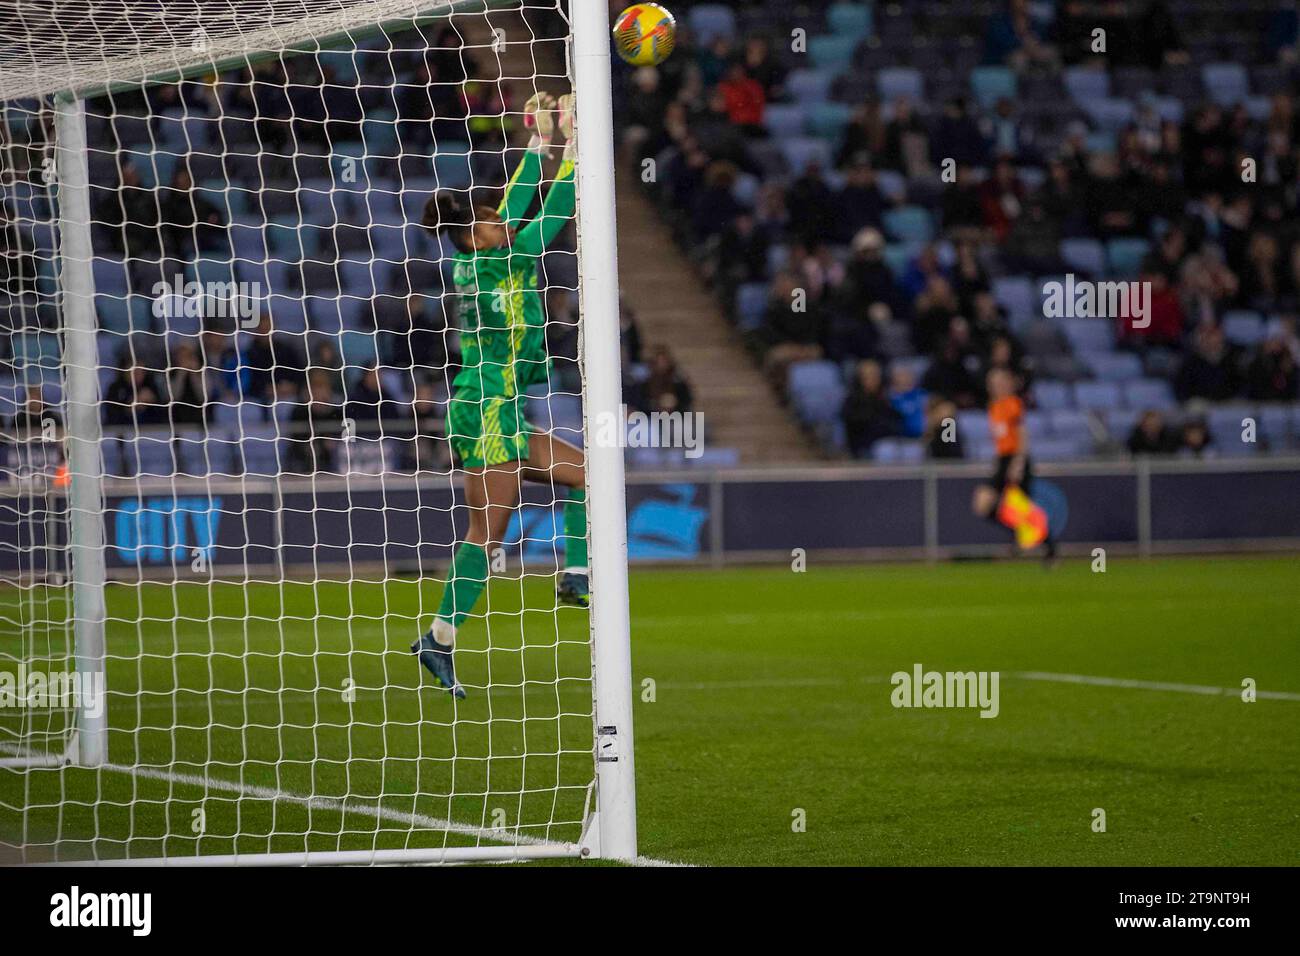 Manchester on Saturday 25th November 2023.Khiara Keating #35 (GK) of Manchester City makes a save during the Barclays FA Women's Super League match between Manchester City and Tottenham Hotspur at the Joie Stadium, Manchester on Saturday 25th November 2023. (Photo: Mike Morese | MI News) Credit: MI News & Sport /Alamy Live News Stock Photo